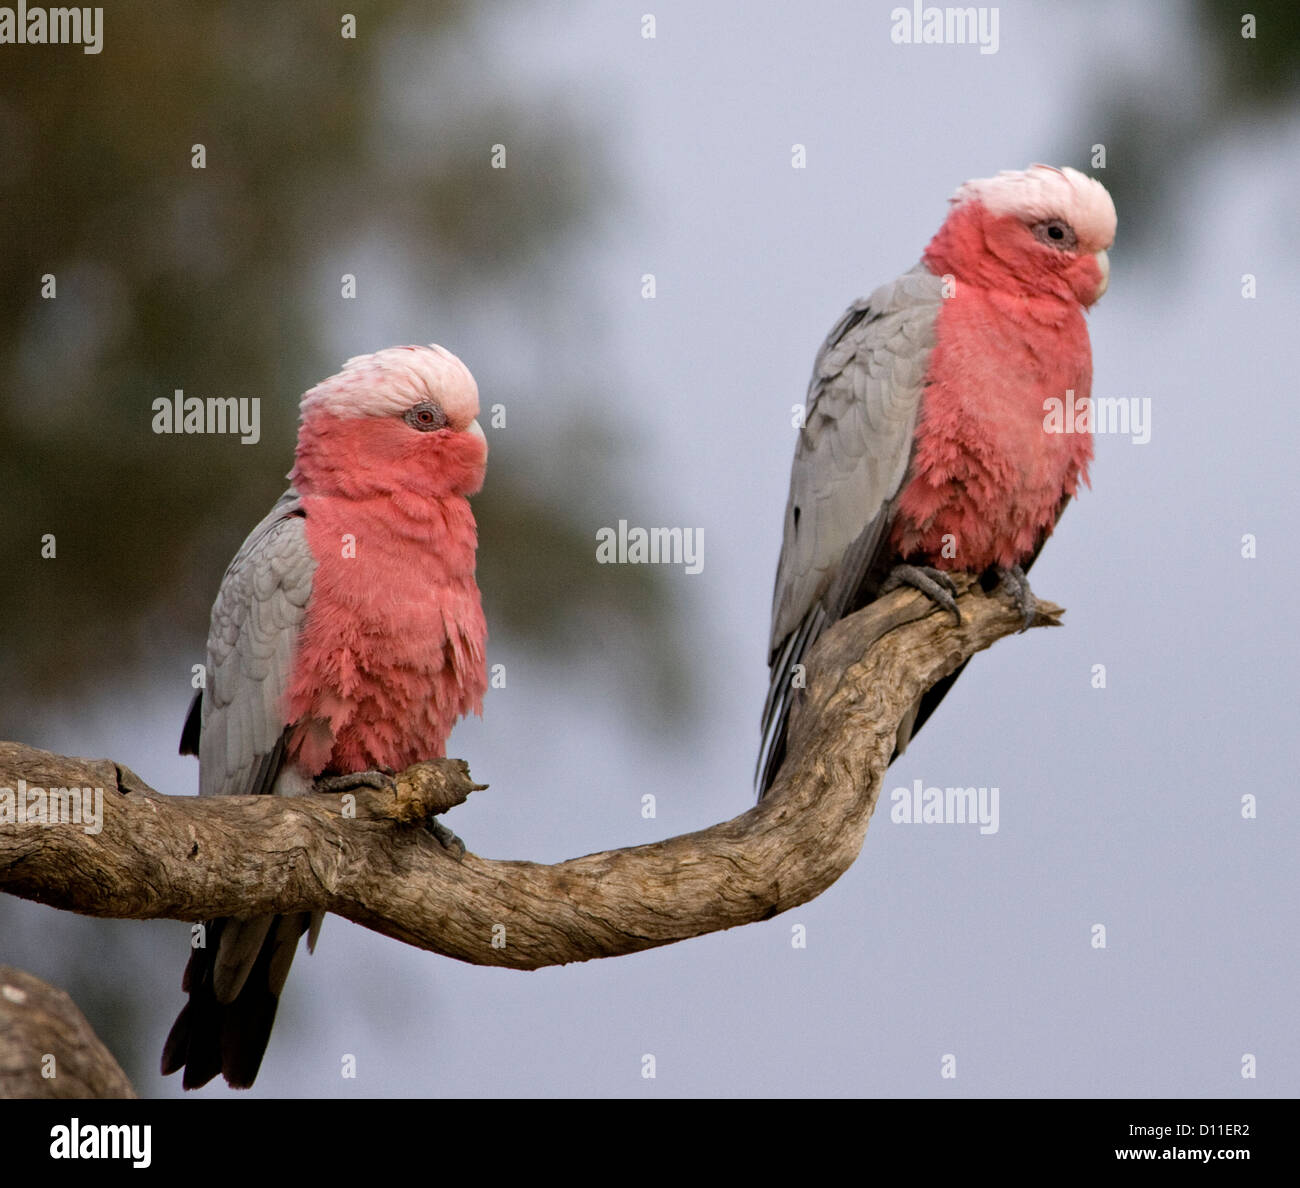 repertoire Daisy ekstensivt Australian Parrots High Resolution Stock Photography and Images - Alamy